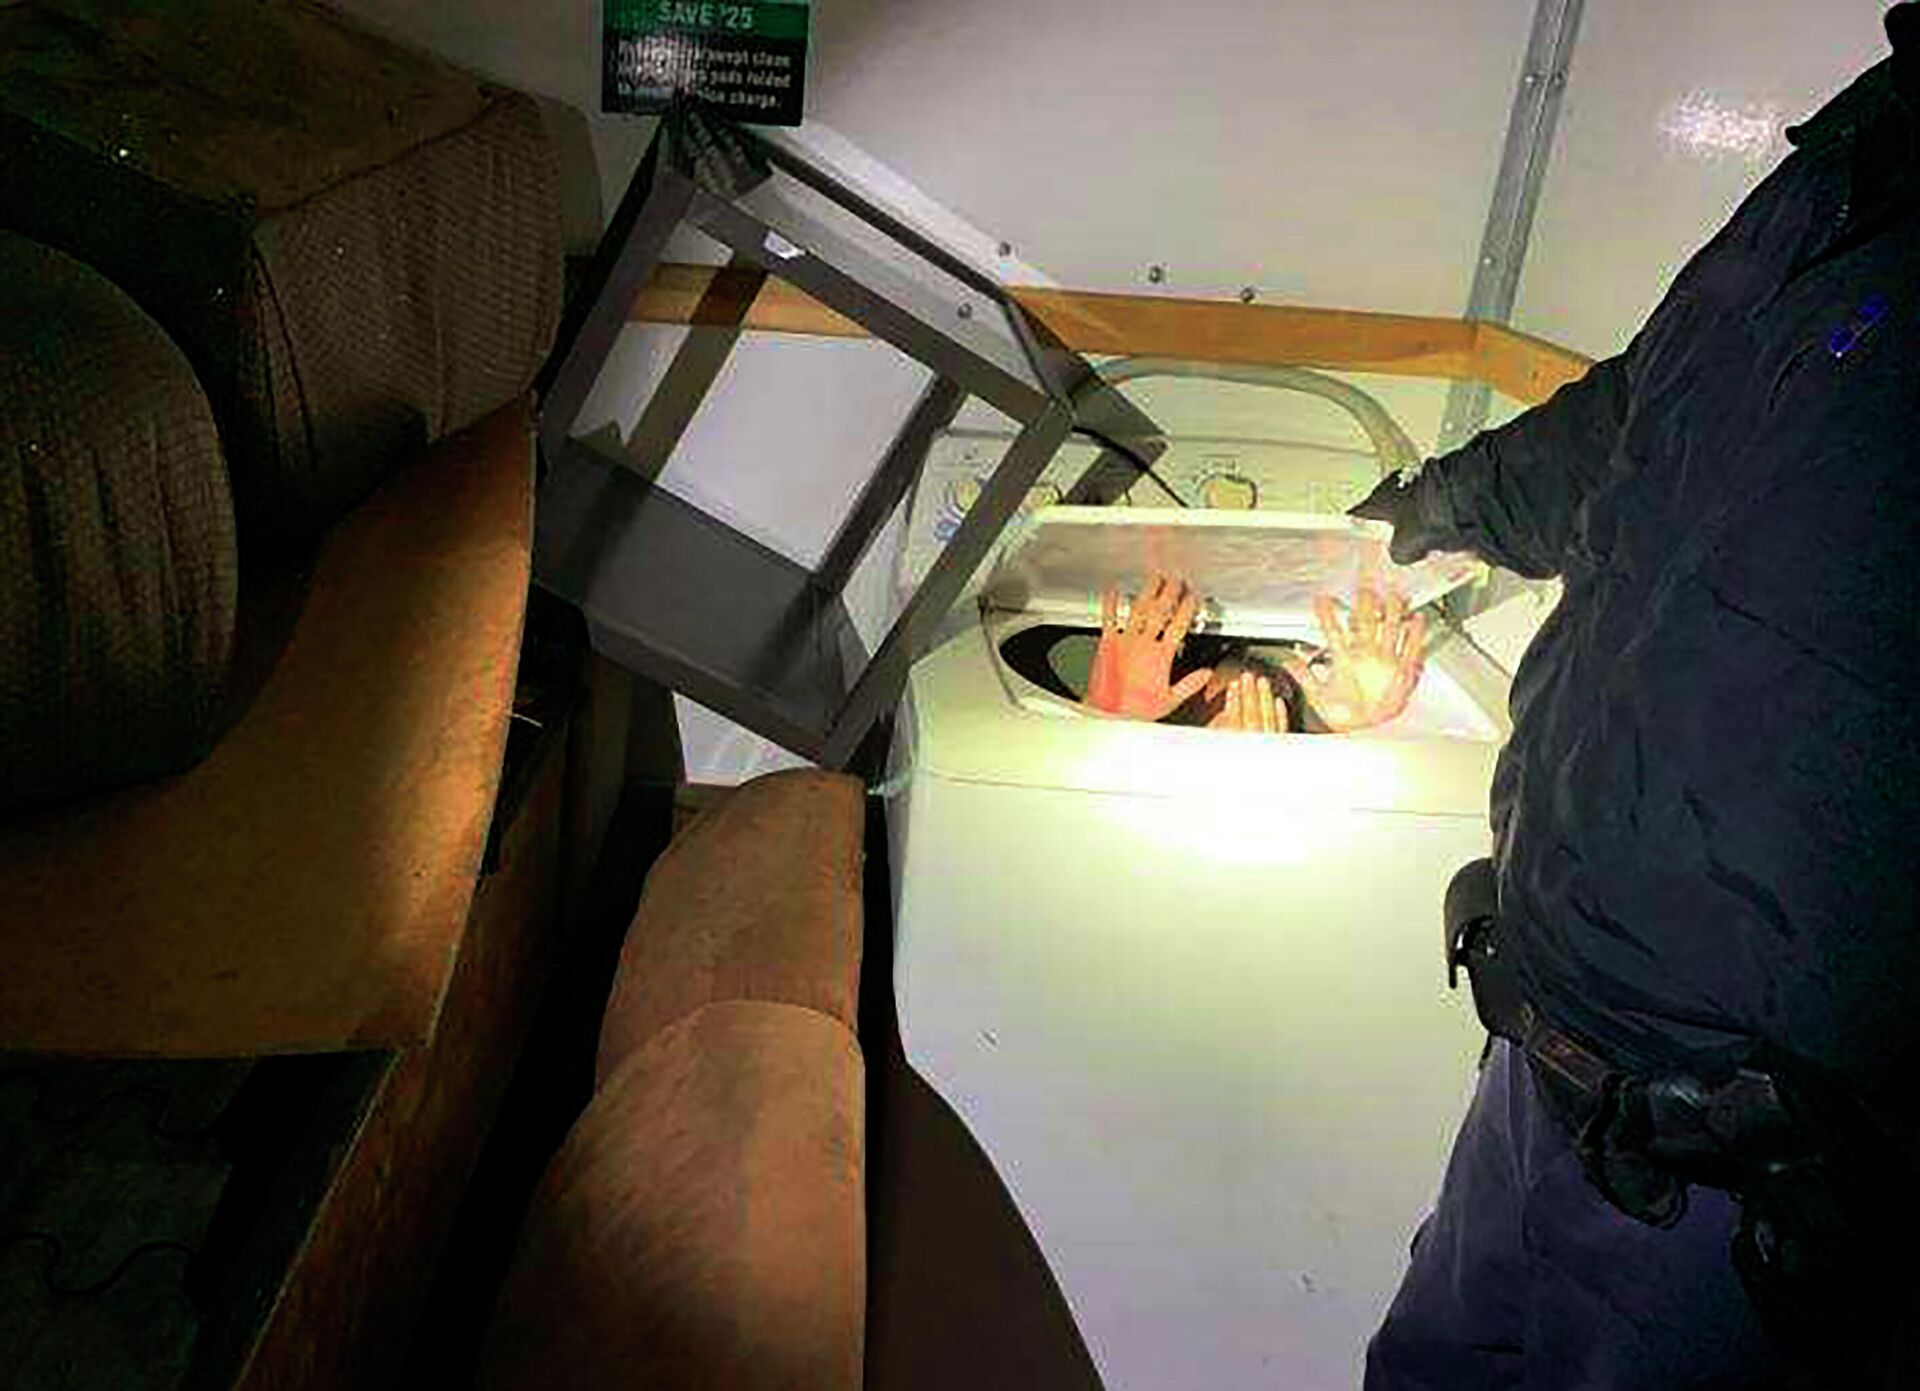 This photo released Monday, Dec. 9, 2019 by U.S. Customs and Border Protection (CBP) shows hands held up by a person or persons hiding in a washing machine, among 11 Chinese nationals found by CBP agents hiding in furniture and appliances inside a moving truck stopped Saturday, Dec. 7, while entering the U.S. from Mexico at the San Ysidro border crossing near San Diego, federal officials said. - Sputnik International, 1920, 19.11.2021